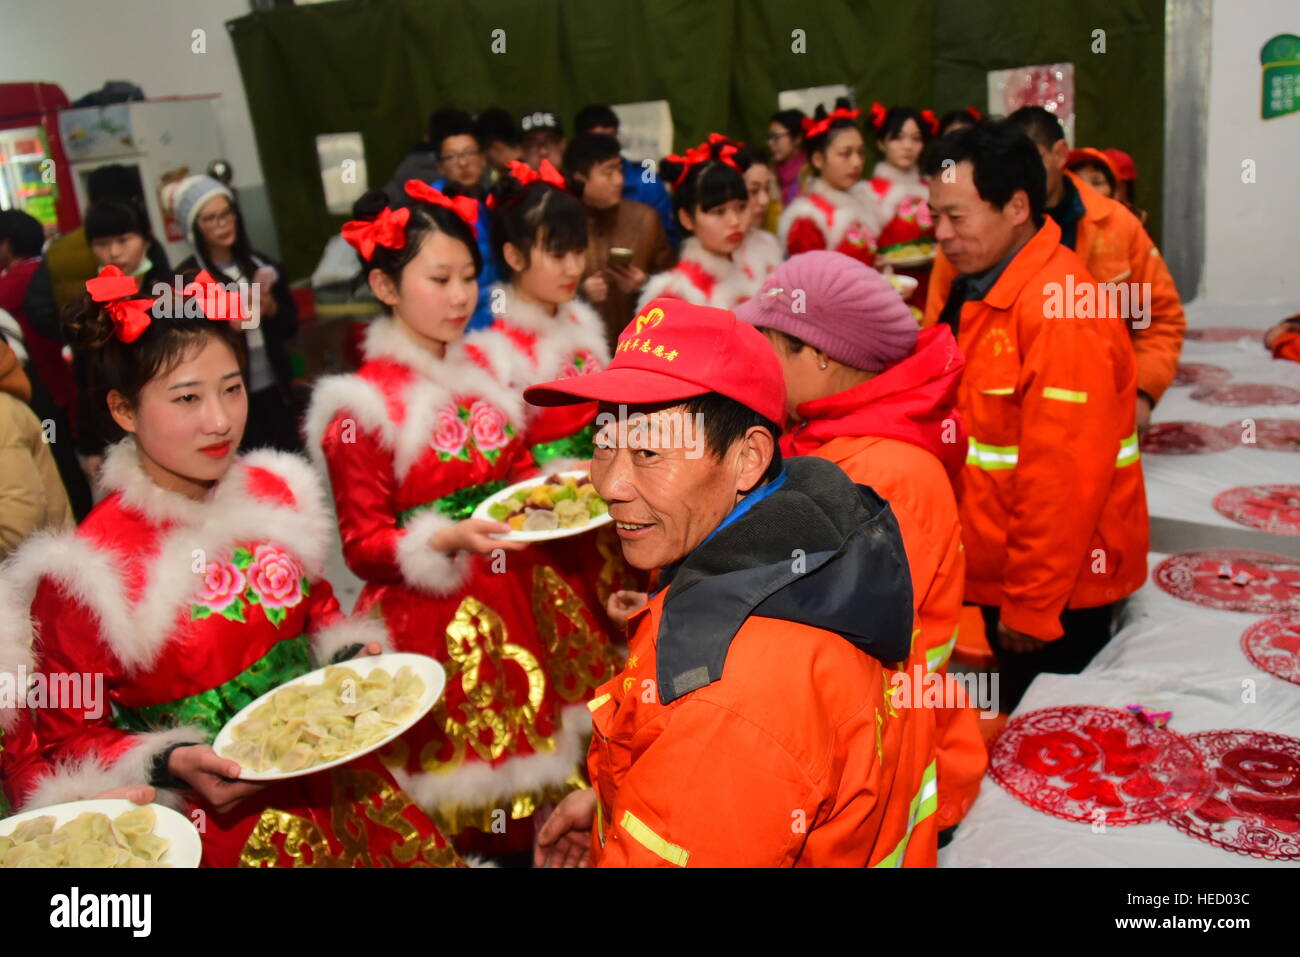 Zhengzhou, Zhengzhou, China. 20th Dec, 2016. Zhengzhou, CHINA-December 20 2016: (EDITORIAL USE ONLY. CHINA OUT) .Students make thousands of dumplings for street cleaners at Henan University of Agriculture in Zhengzhou, capital of central China's Henan Province, December 20th, 2016, marking the solar term 'Winter Solstice'. The dumplings were laid in a pattern of the Chinese character 'Fu' which means good luck. The traditional Chinese lunar calendar divides the year into 24 solar terms. Winter Solstice, the 22nd solar term of the year, begins this year on Dec 21 and ends on Jan 4. On the Stock Photo